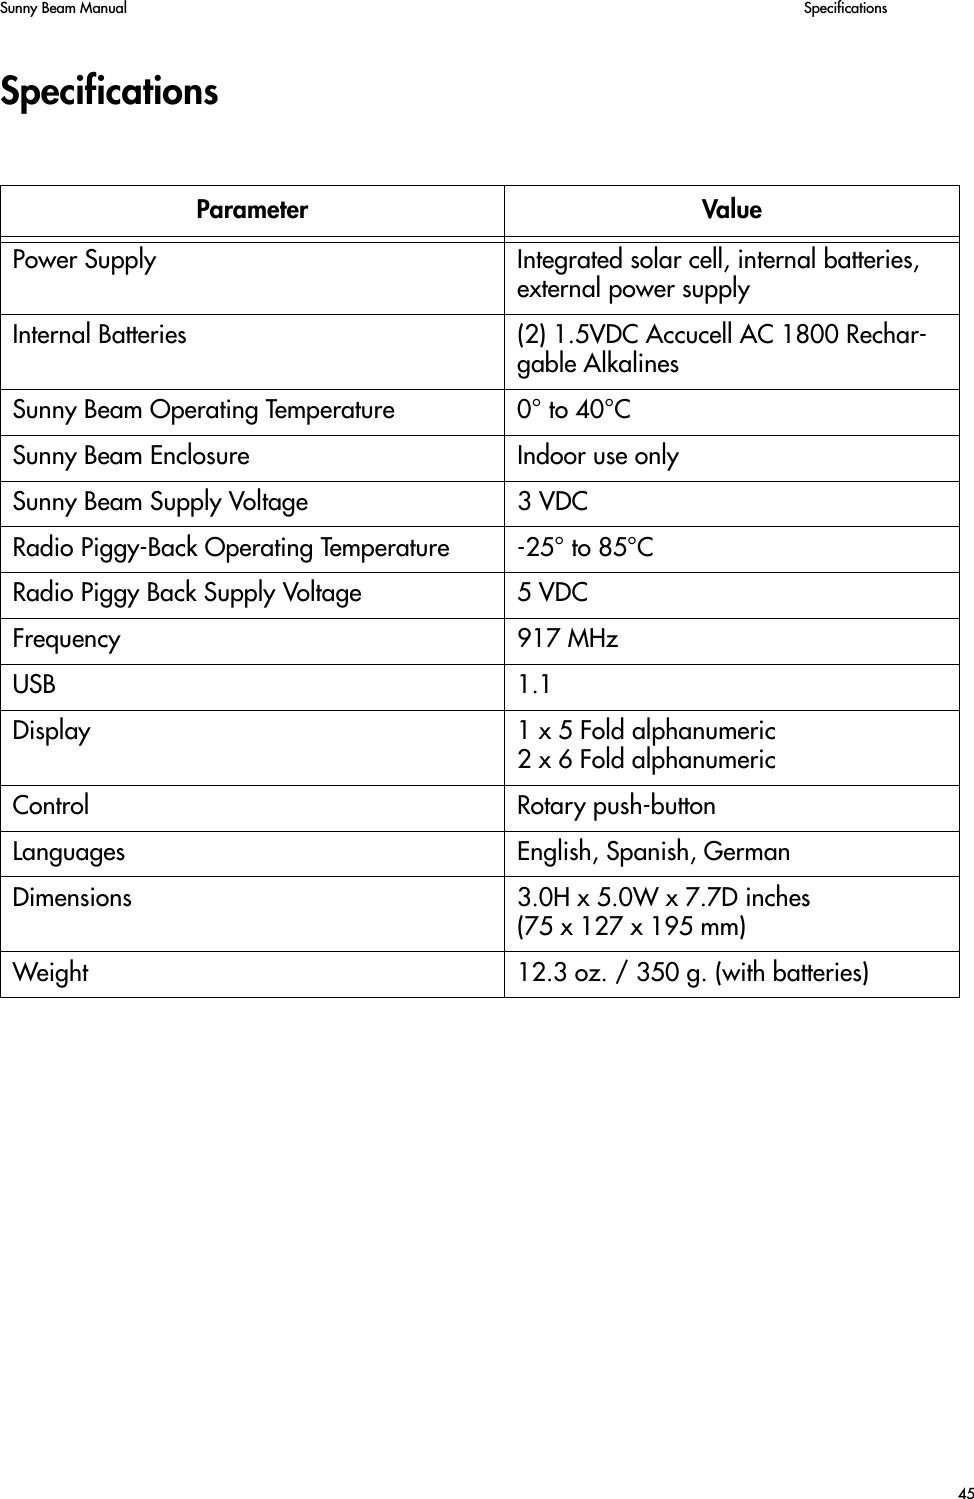 Sunny Beam Manual   Specifications45SpecificationsParameter ValuePower Supply Integrated solar cell, internal batteries, external power supplyInternal Batteries (2) 1.5VDC Accucell AC 1800 Rechar-gable AlkalinesSunny Beam Operating Temperature 0° to 40°CSunny Beam Enclosure Indoor use onlySunny Beam Supply Voltage 3 VDCRadio Piggy-Back Operating Temperature -25° to 85°CRadio Piggy Back Supply Voltage 5 VDCFrequency 917 MHzUSB 1.1Display 1 x 5 Fold alphanumeric2 x 6 Fold alphanumericControl Rotary push-buttonLanguages English, Spanish, GermanDimensions 3.0H x 5.0W x 7.7D inches(75 x 127 x 195 mm)Weight 12.3 oz. / 350 g. (with batteries)